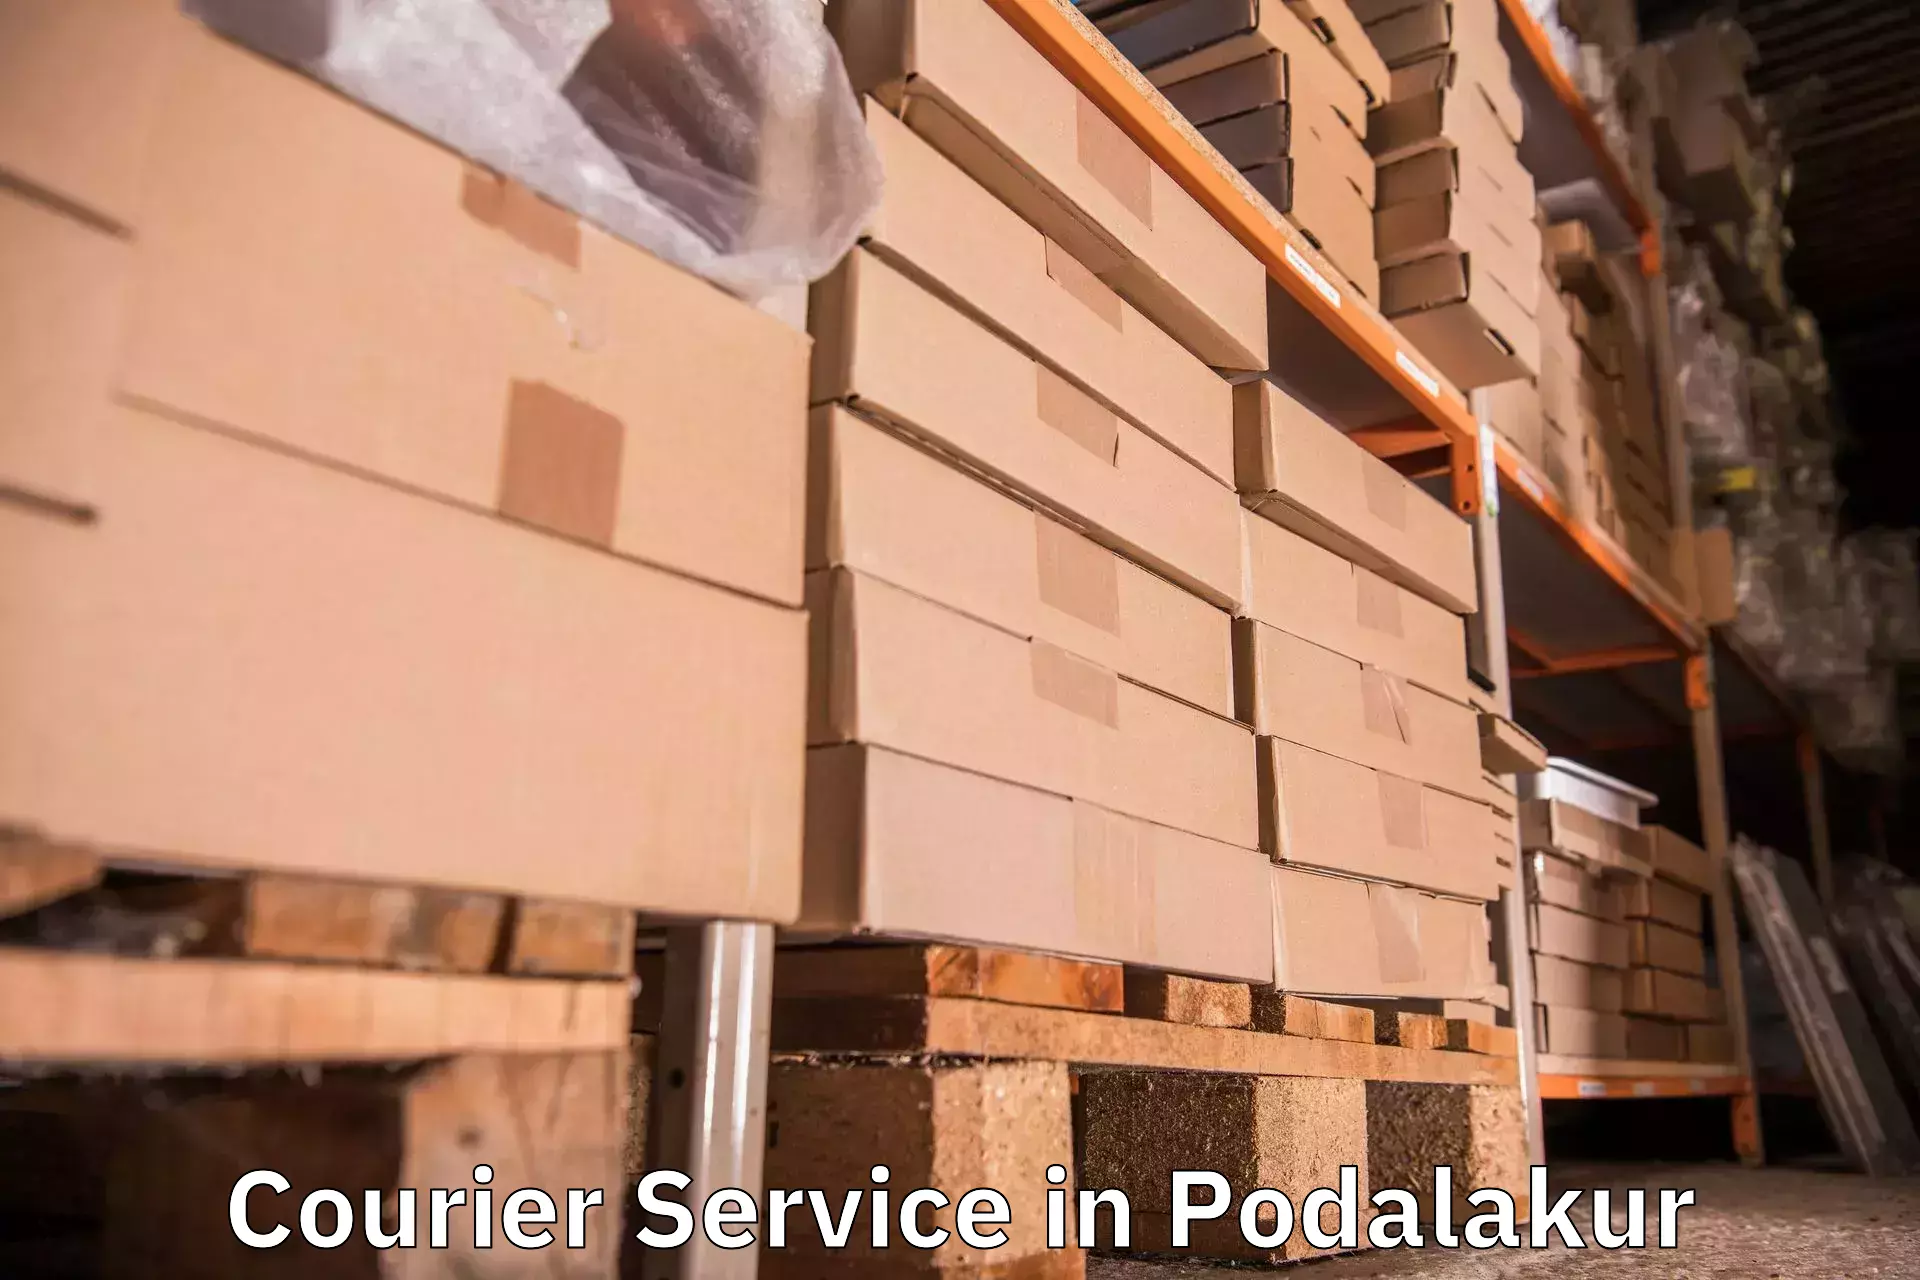 Enhanced delivery experience in Podalakur